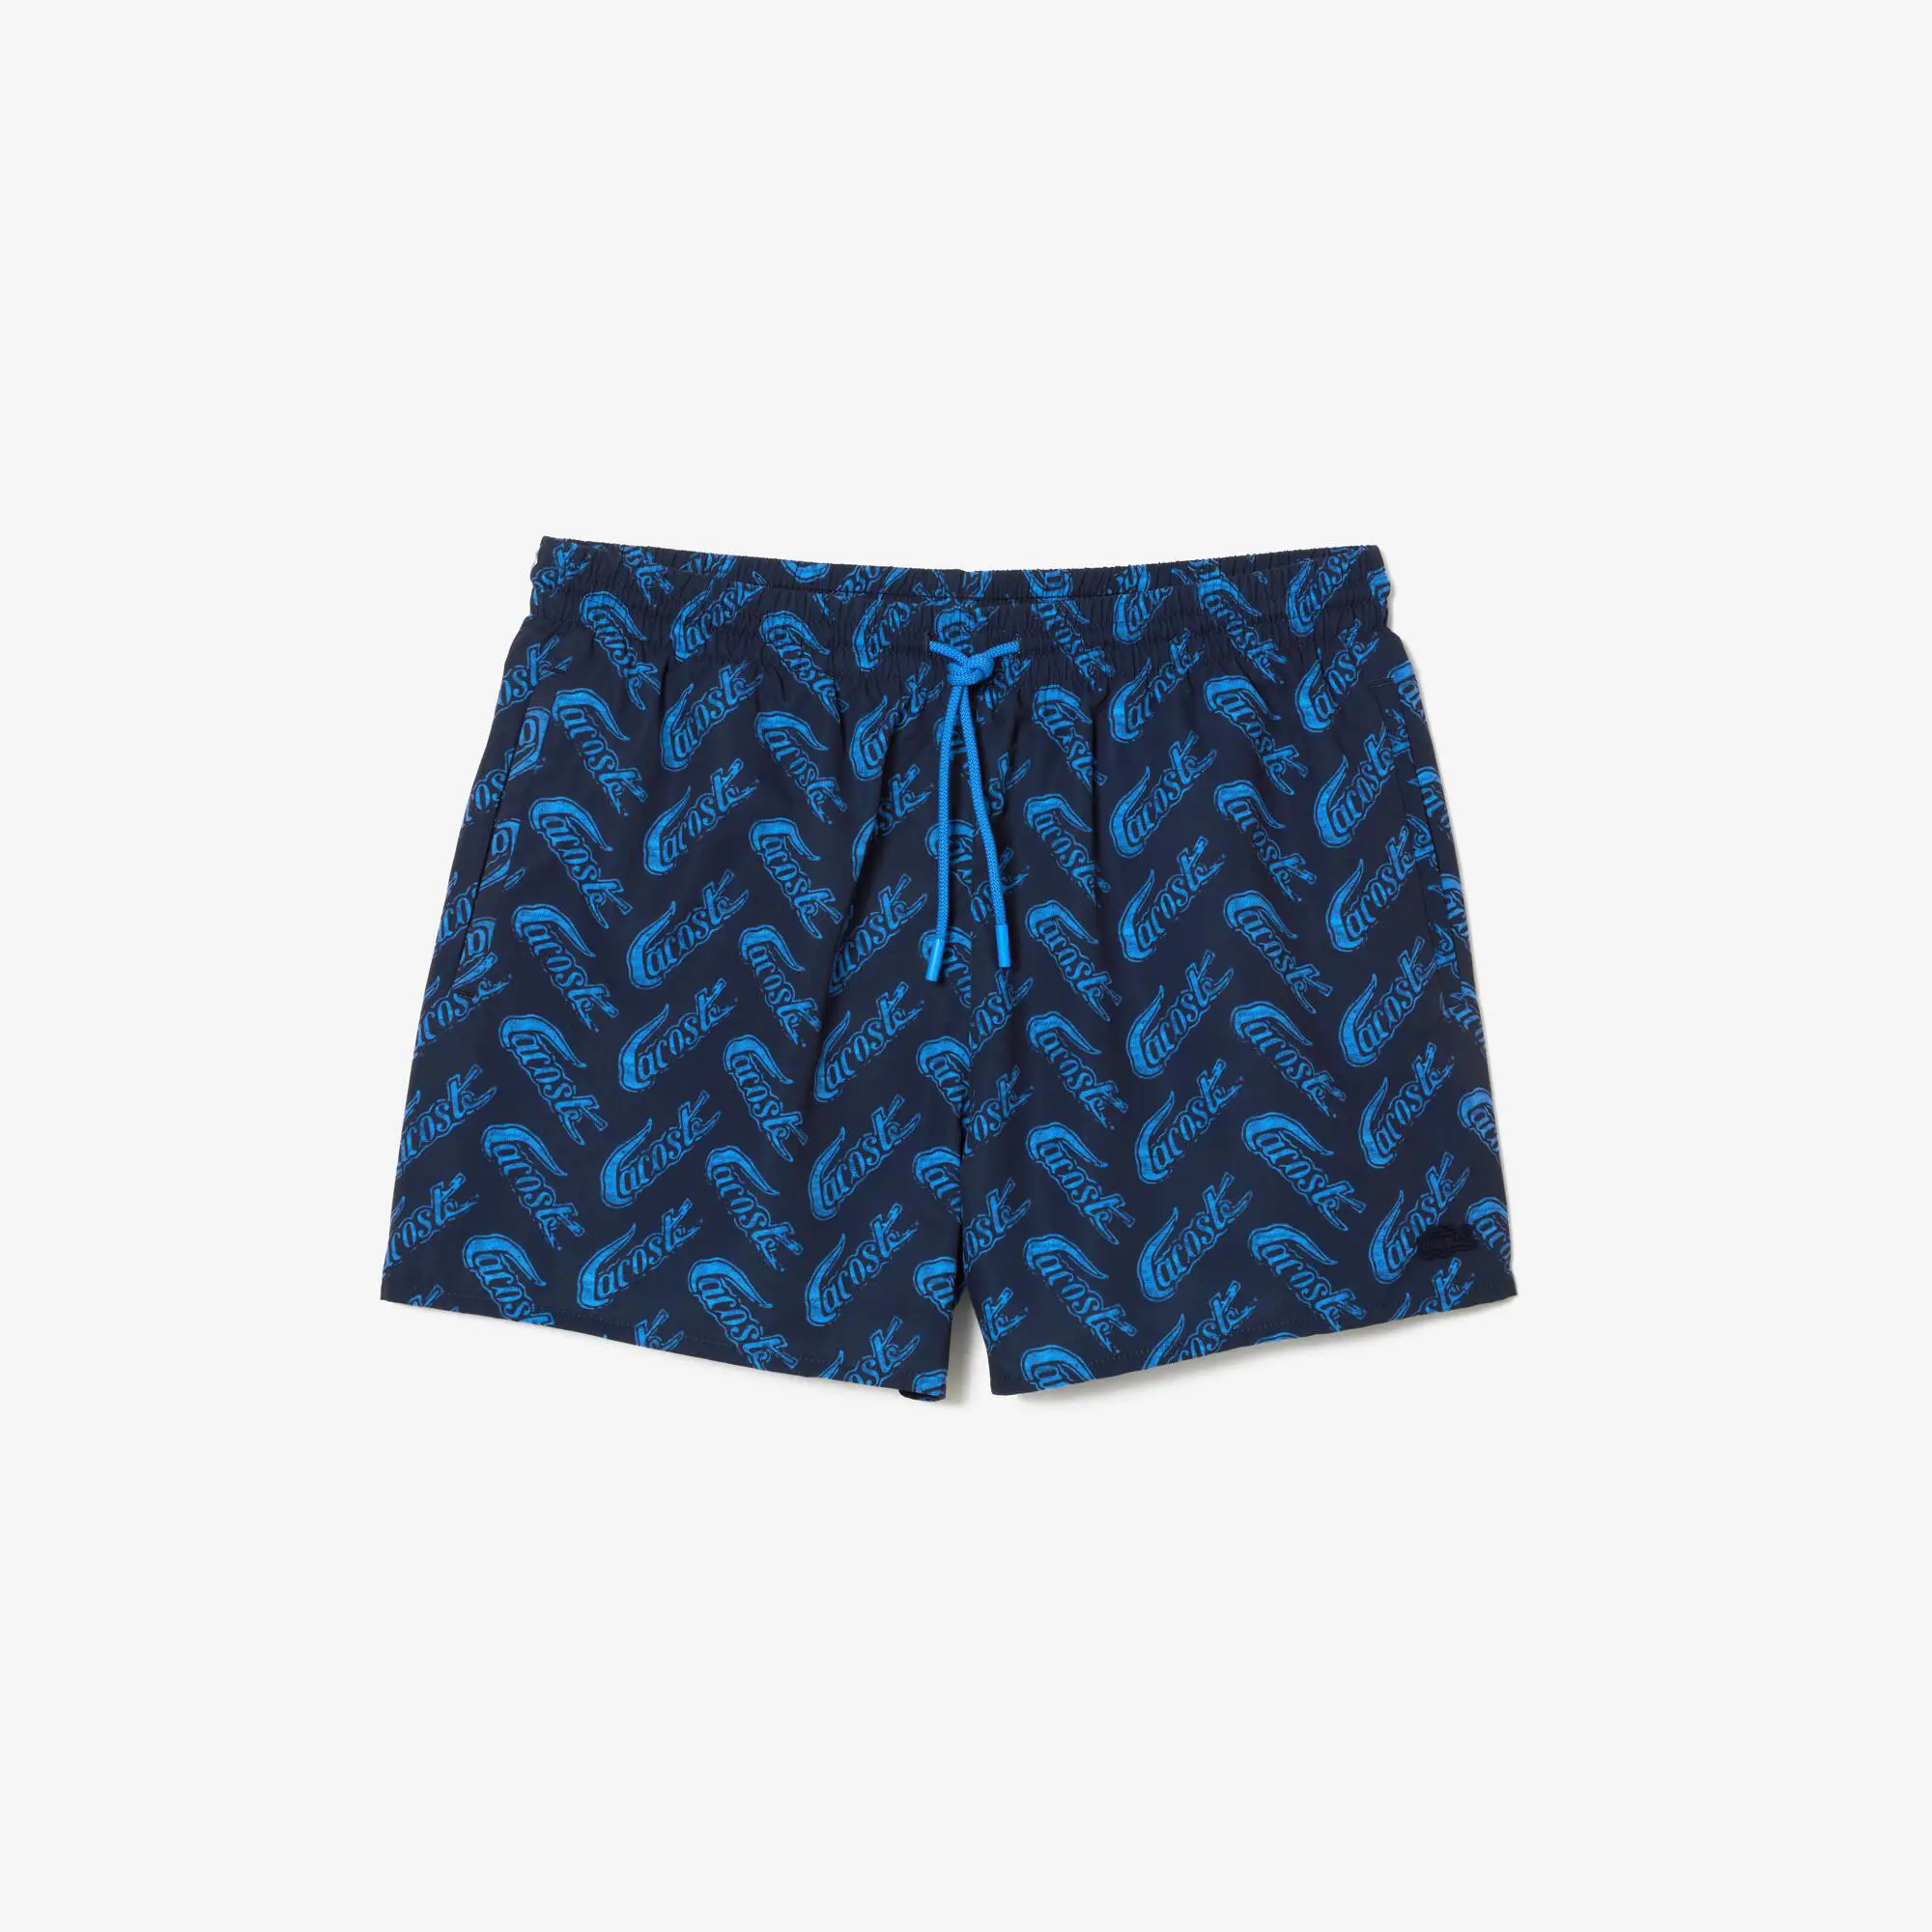 Lacoste Men’s Lacoste Recycled Polyester Print Swim Trunks. 2